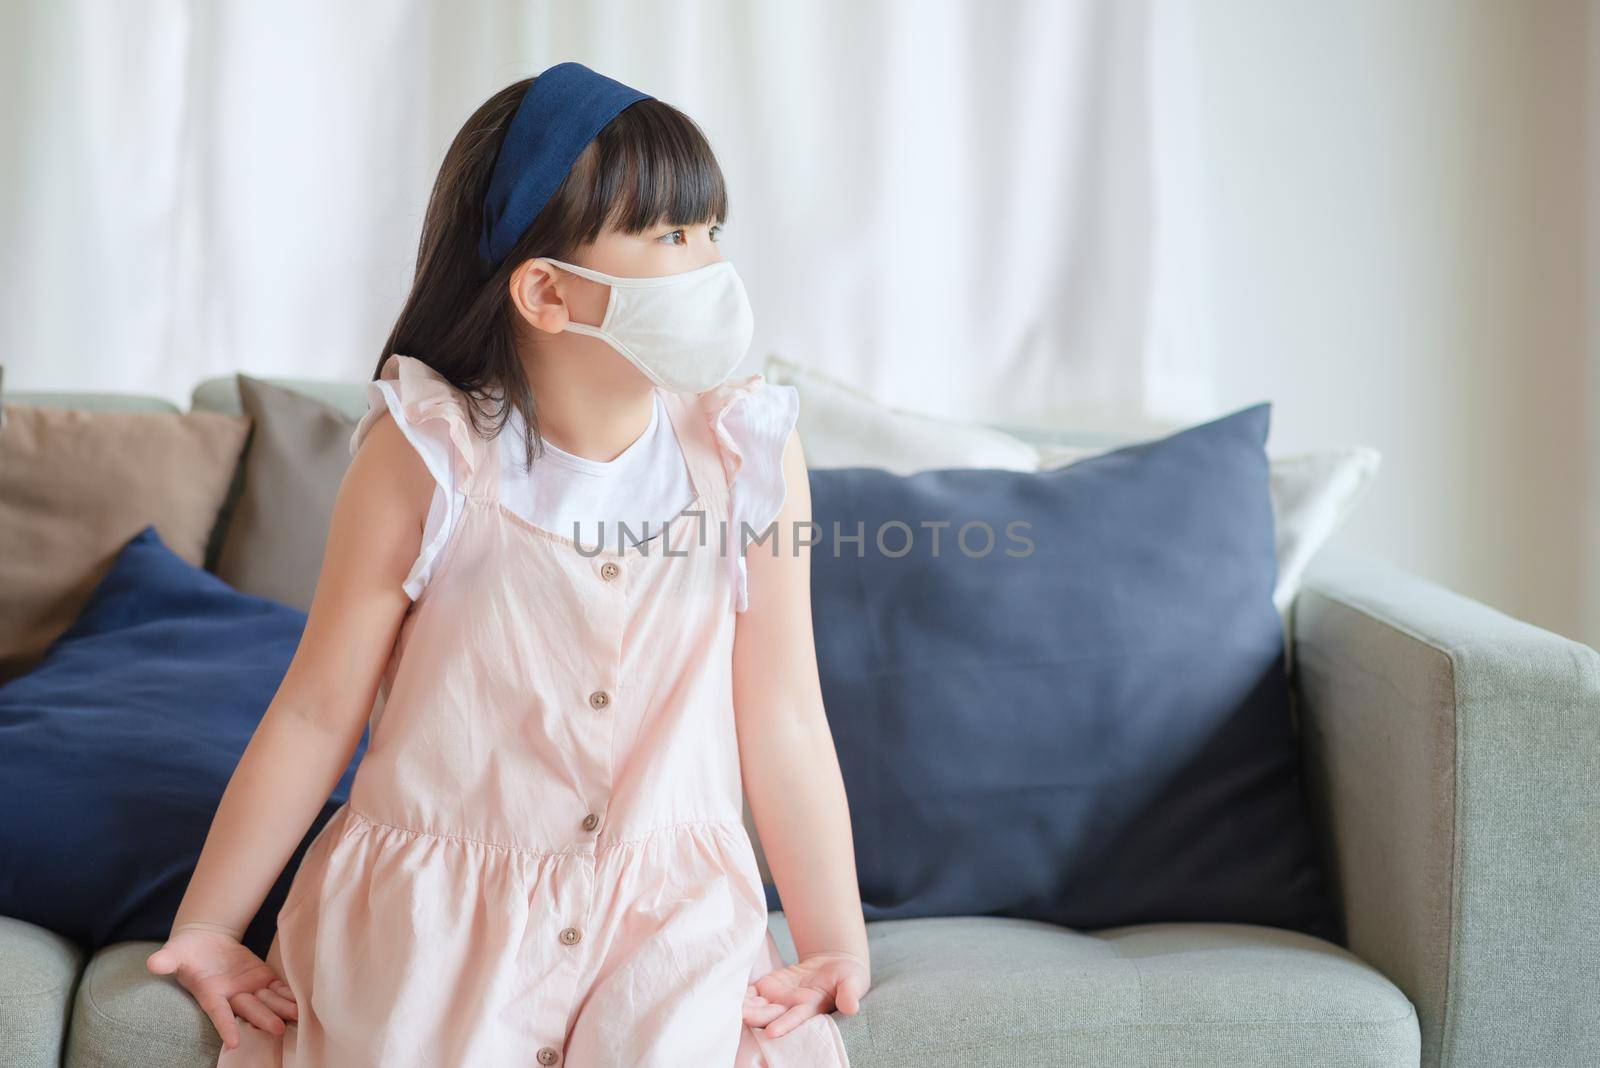 Asian little cute girl wearing hygienic face mask for prevent coronavirus or Covid-19 outbreak keep social distancing and stay at home.